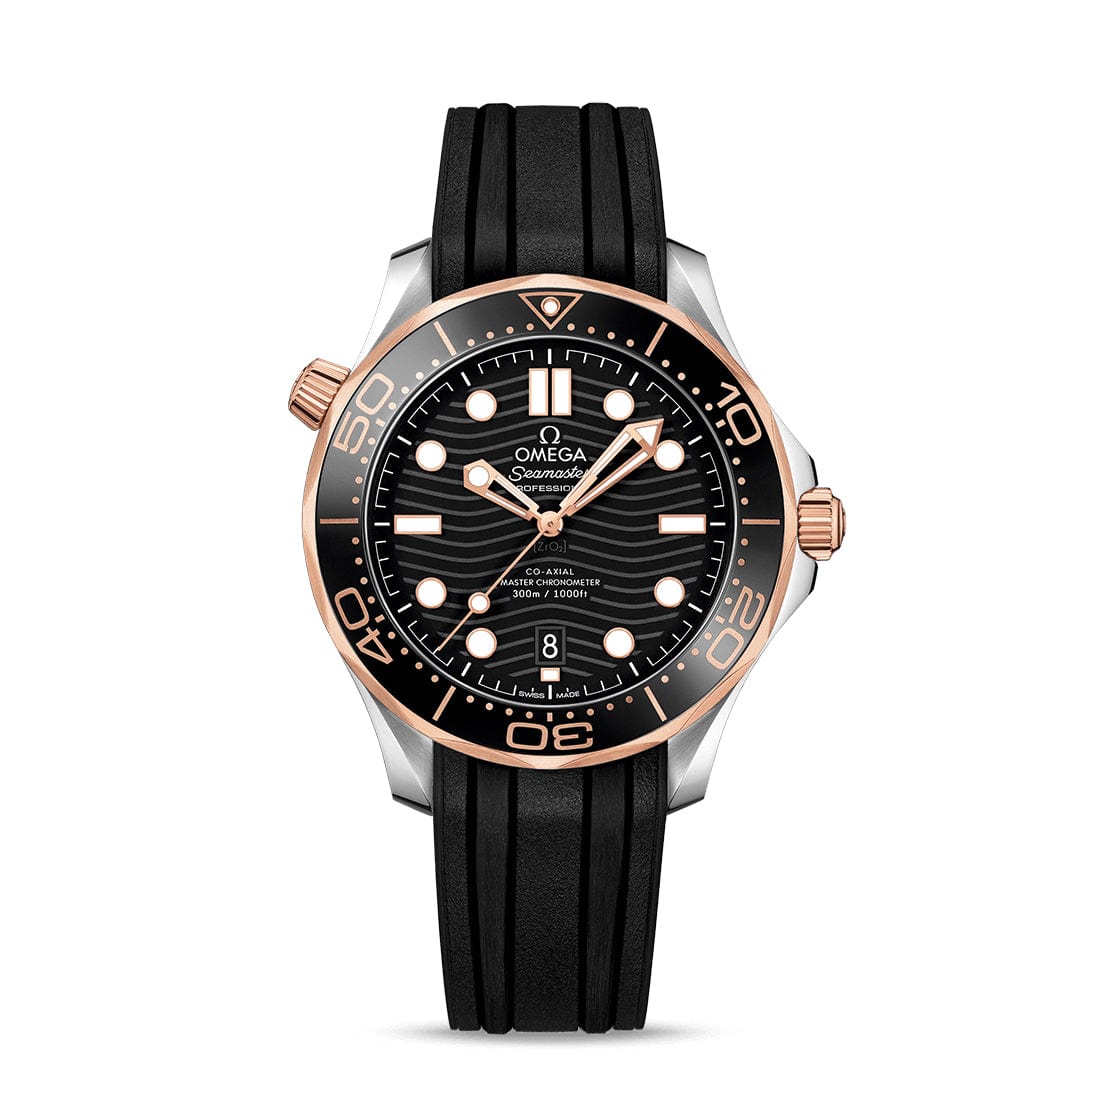 OMEGA Seamaster Diver 300M Co-Axial Master Chronometer 42mm 210.22.42.20.01.002